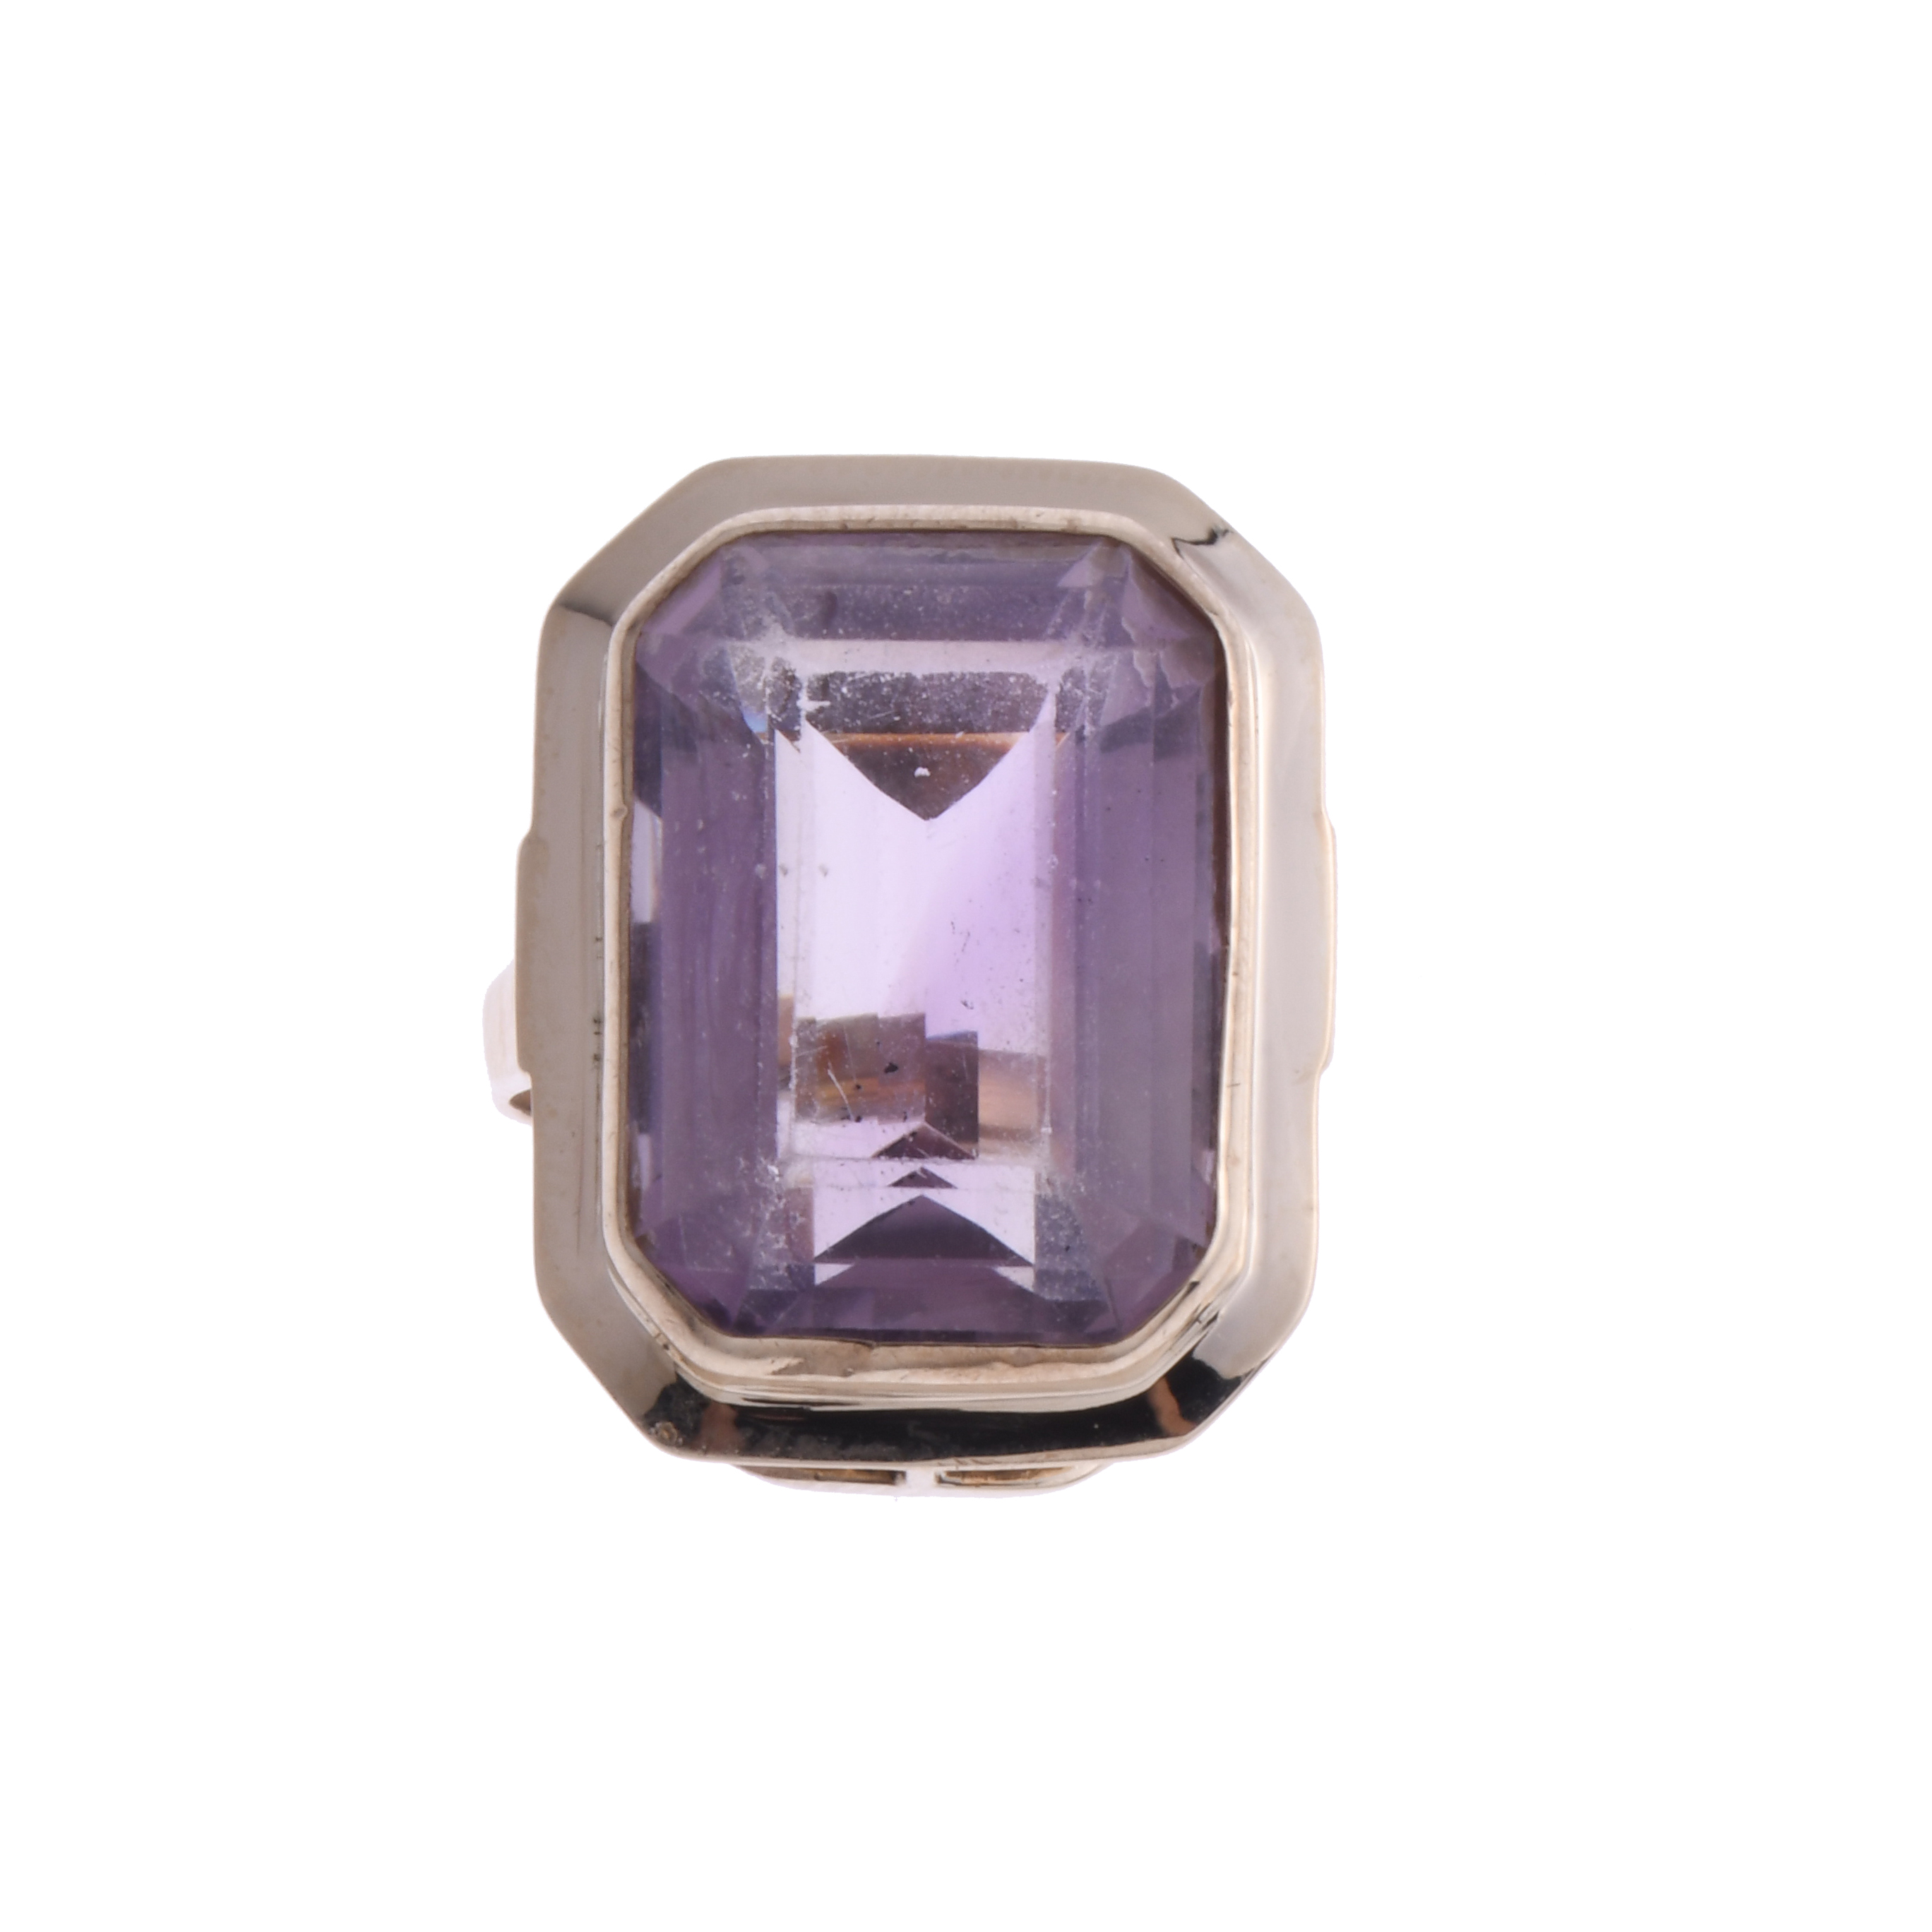 RING WITH LARGE AMETHYST.